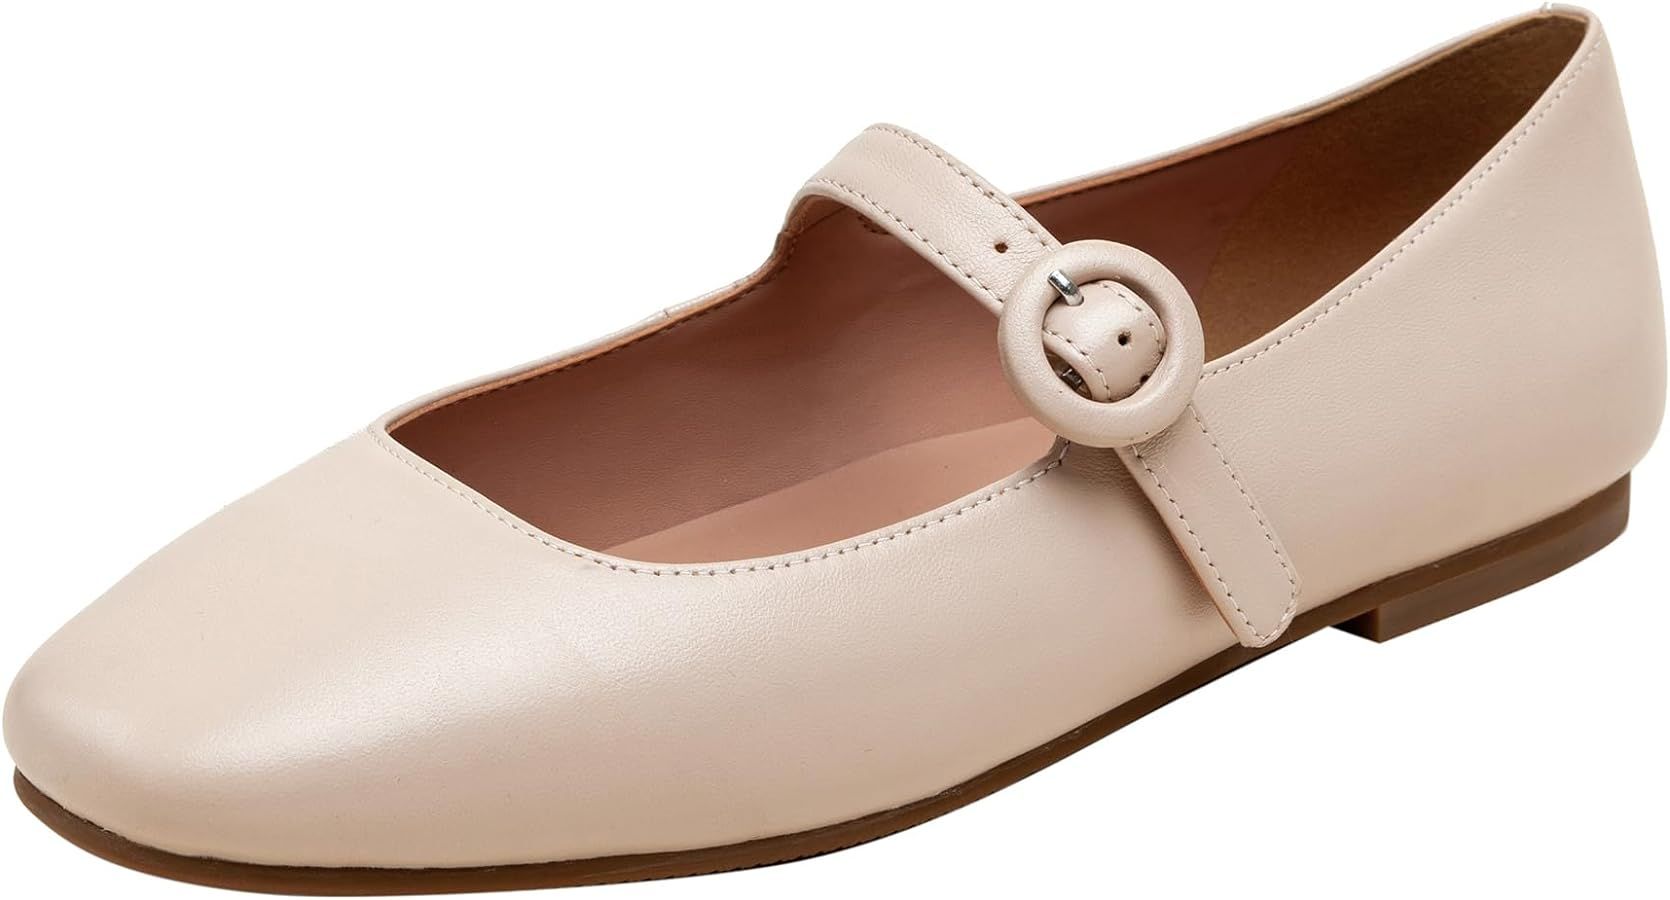 Linea Paolo - Marley - Womens Nappa Leather Or Patent Mary Jane Ballet Flats | Amazon (US)